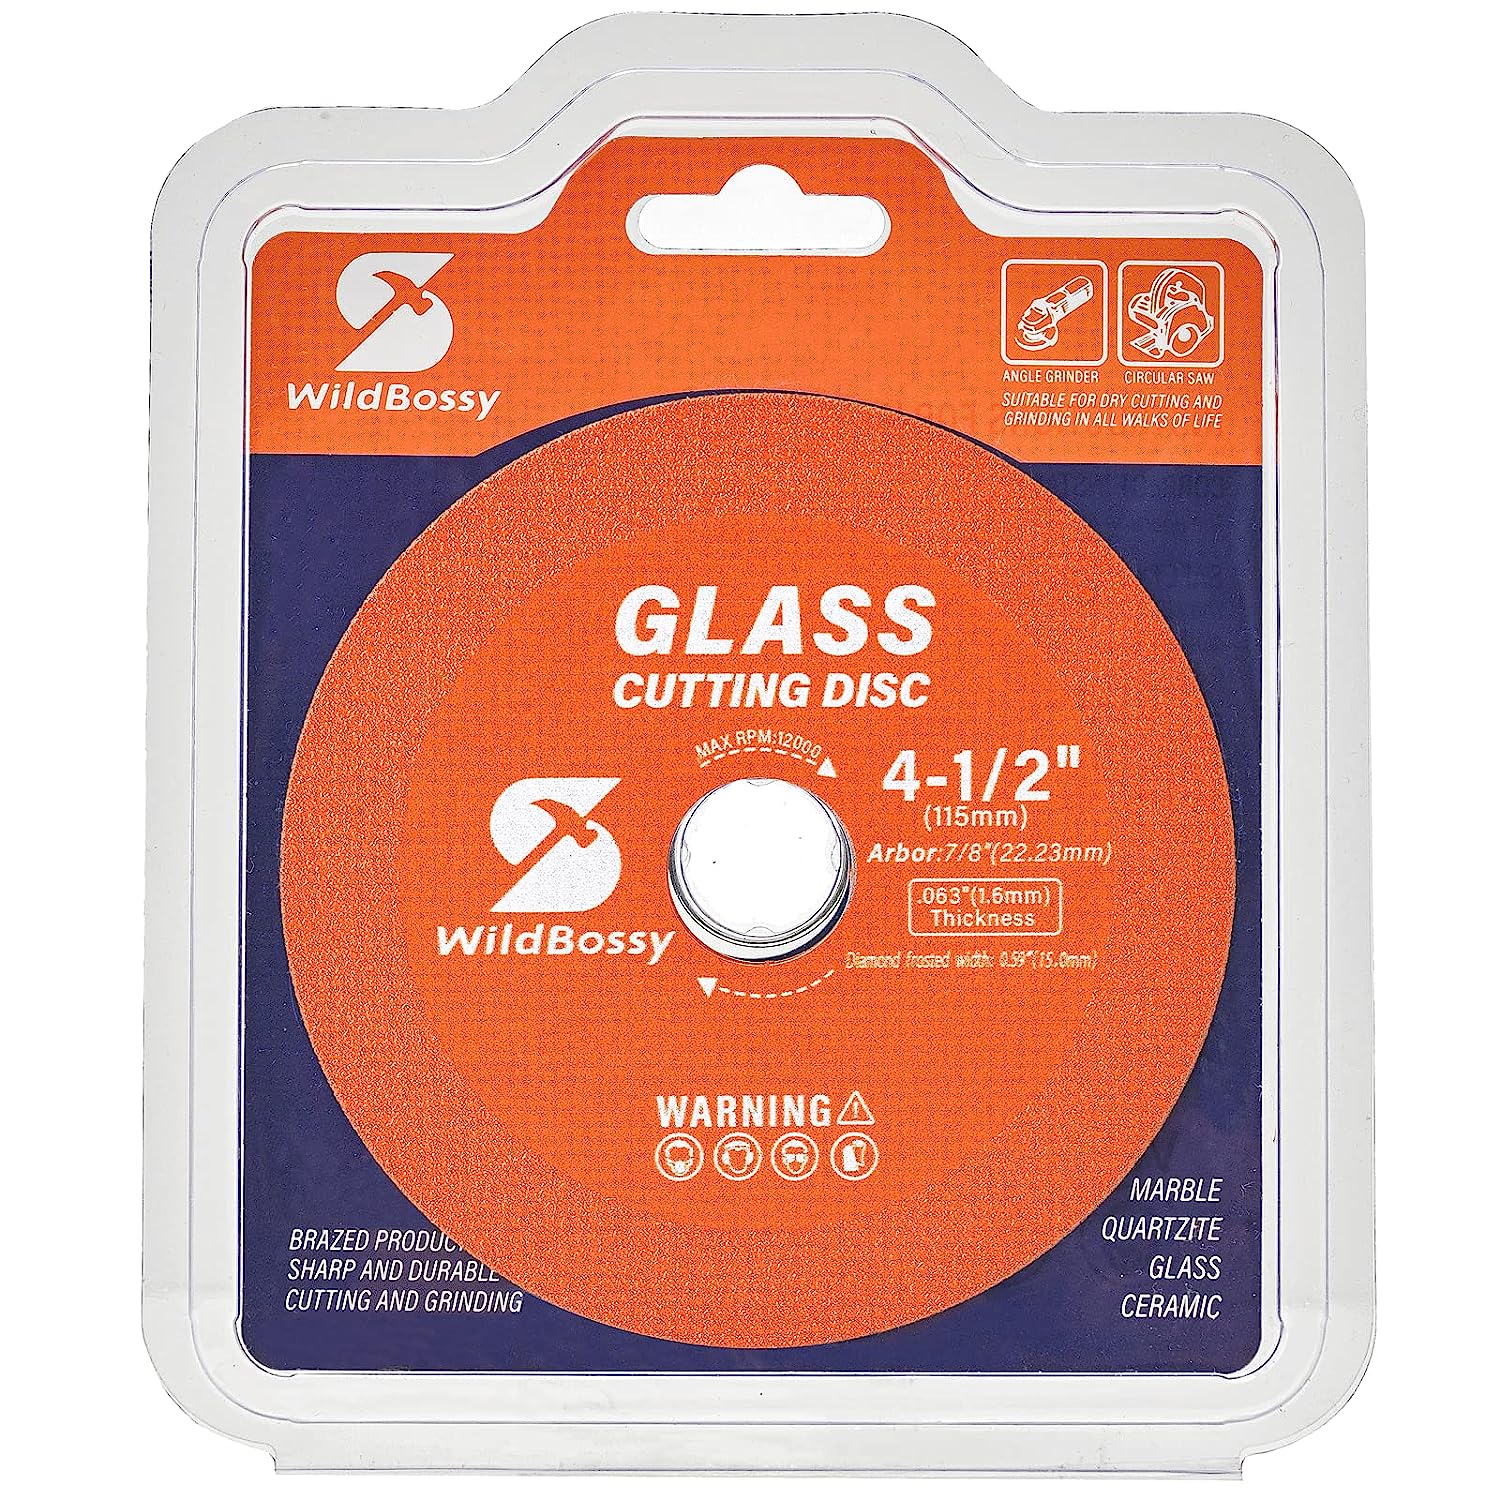 Glass Cutting Disc 4-1/2 Inch for Angle Grinder with [...]